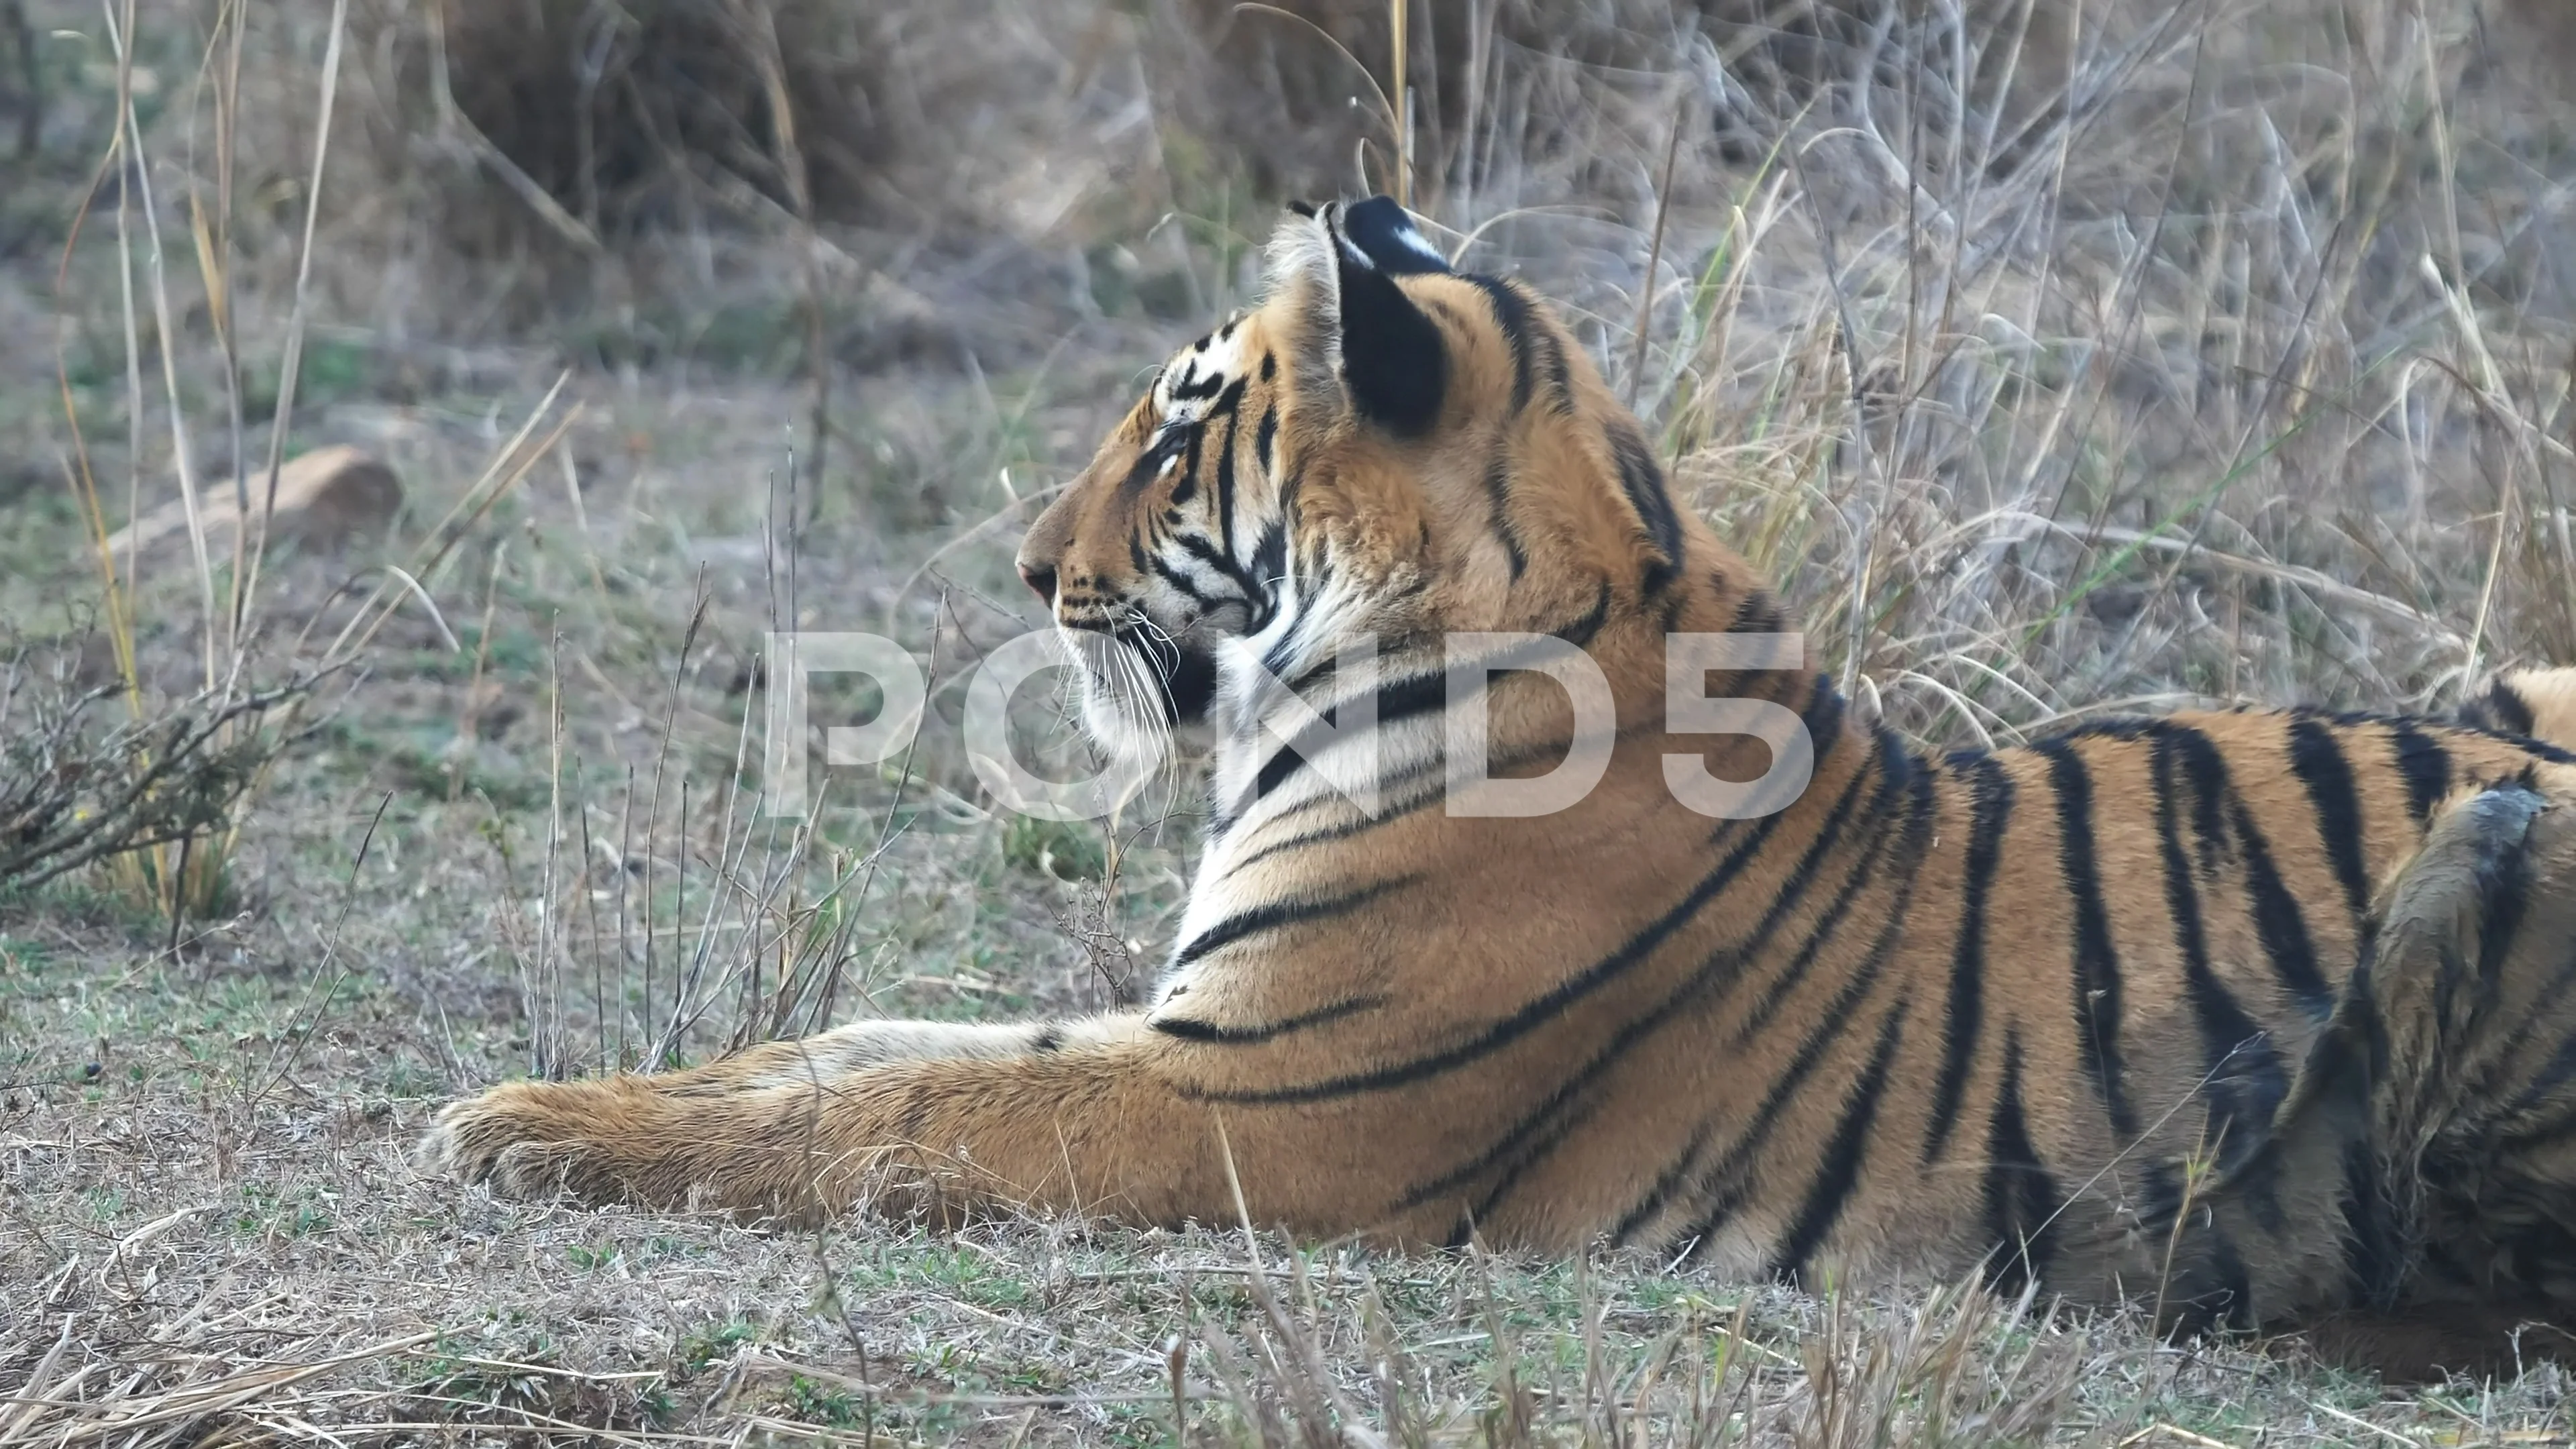 tiger side view